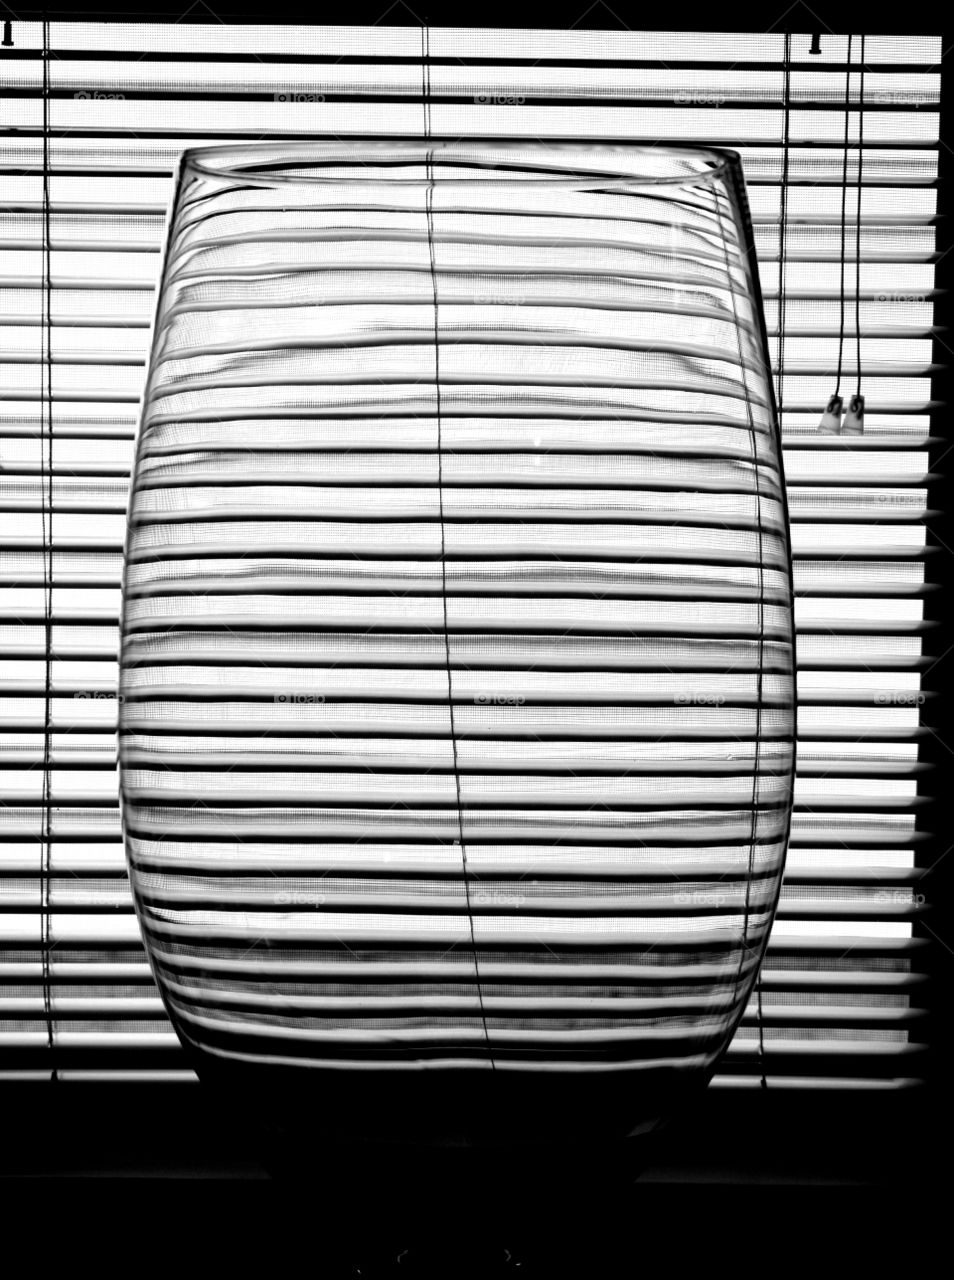 monochrome blinds horizontal lines clear vase translucent abstract